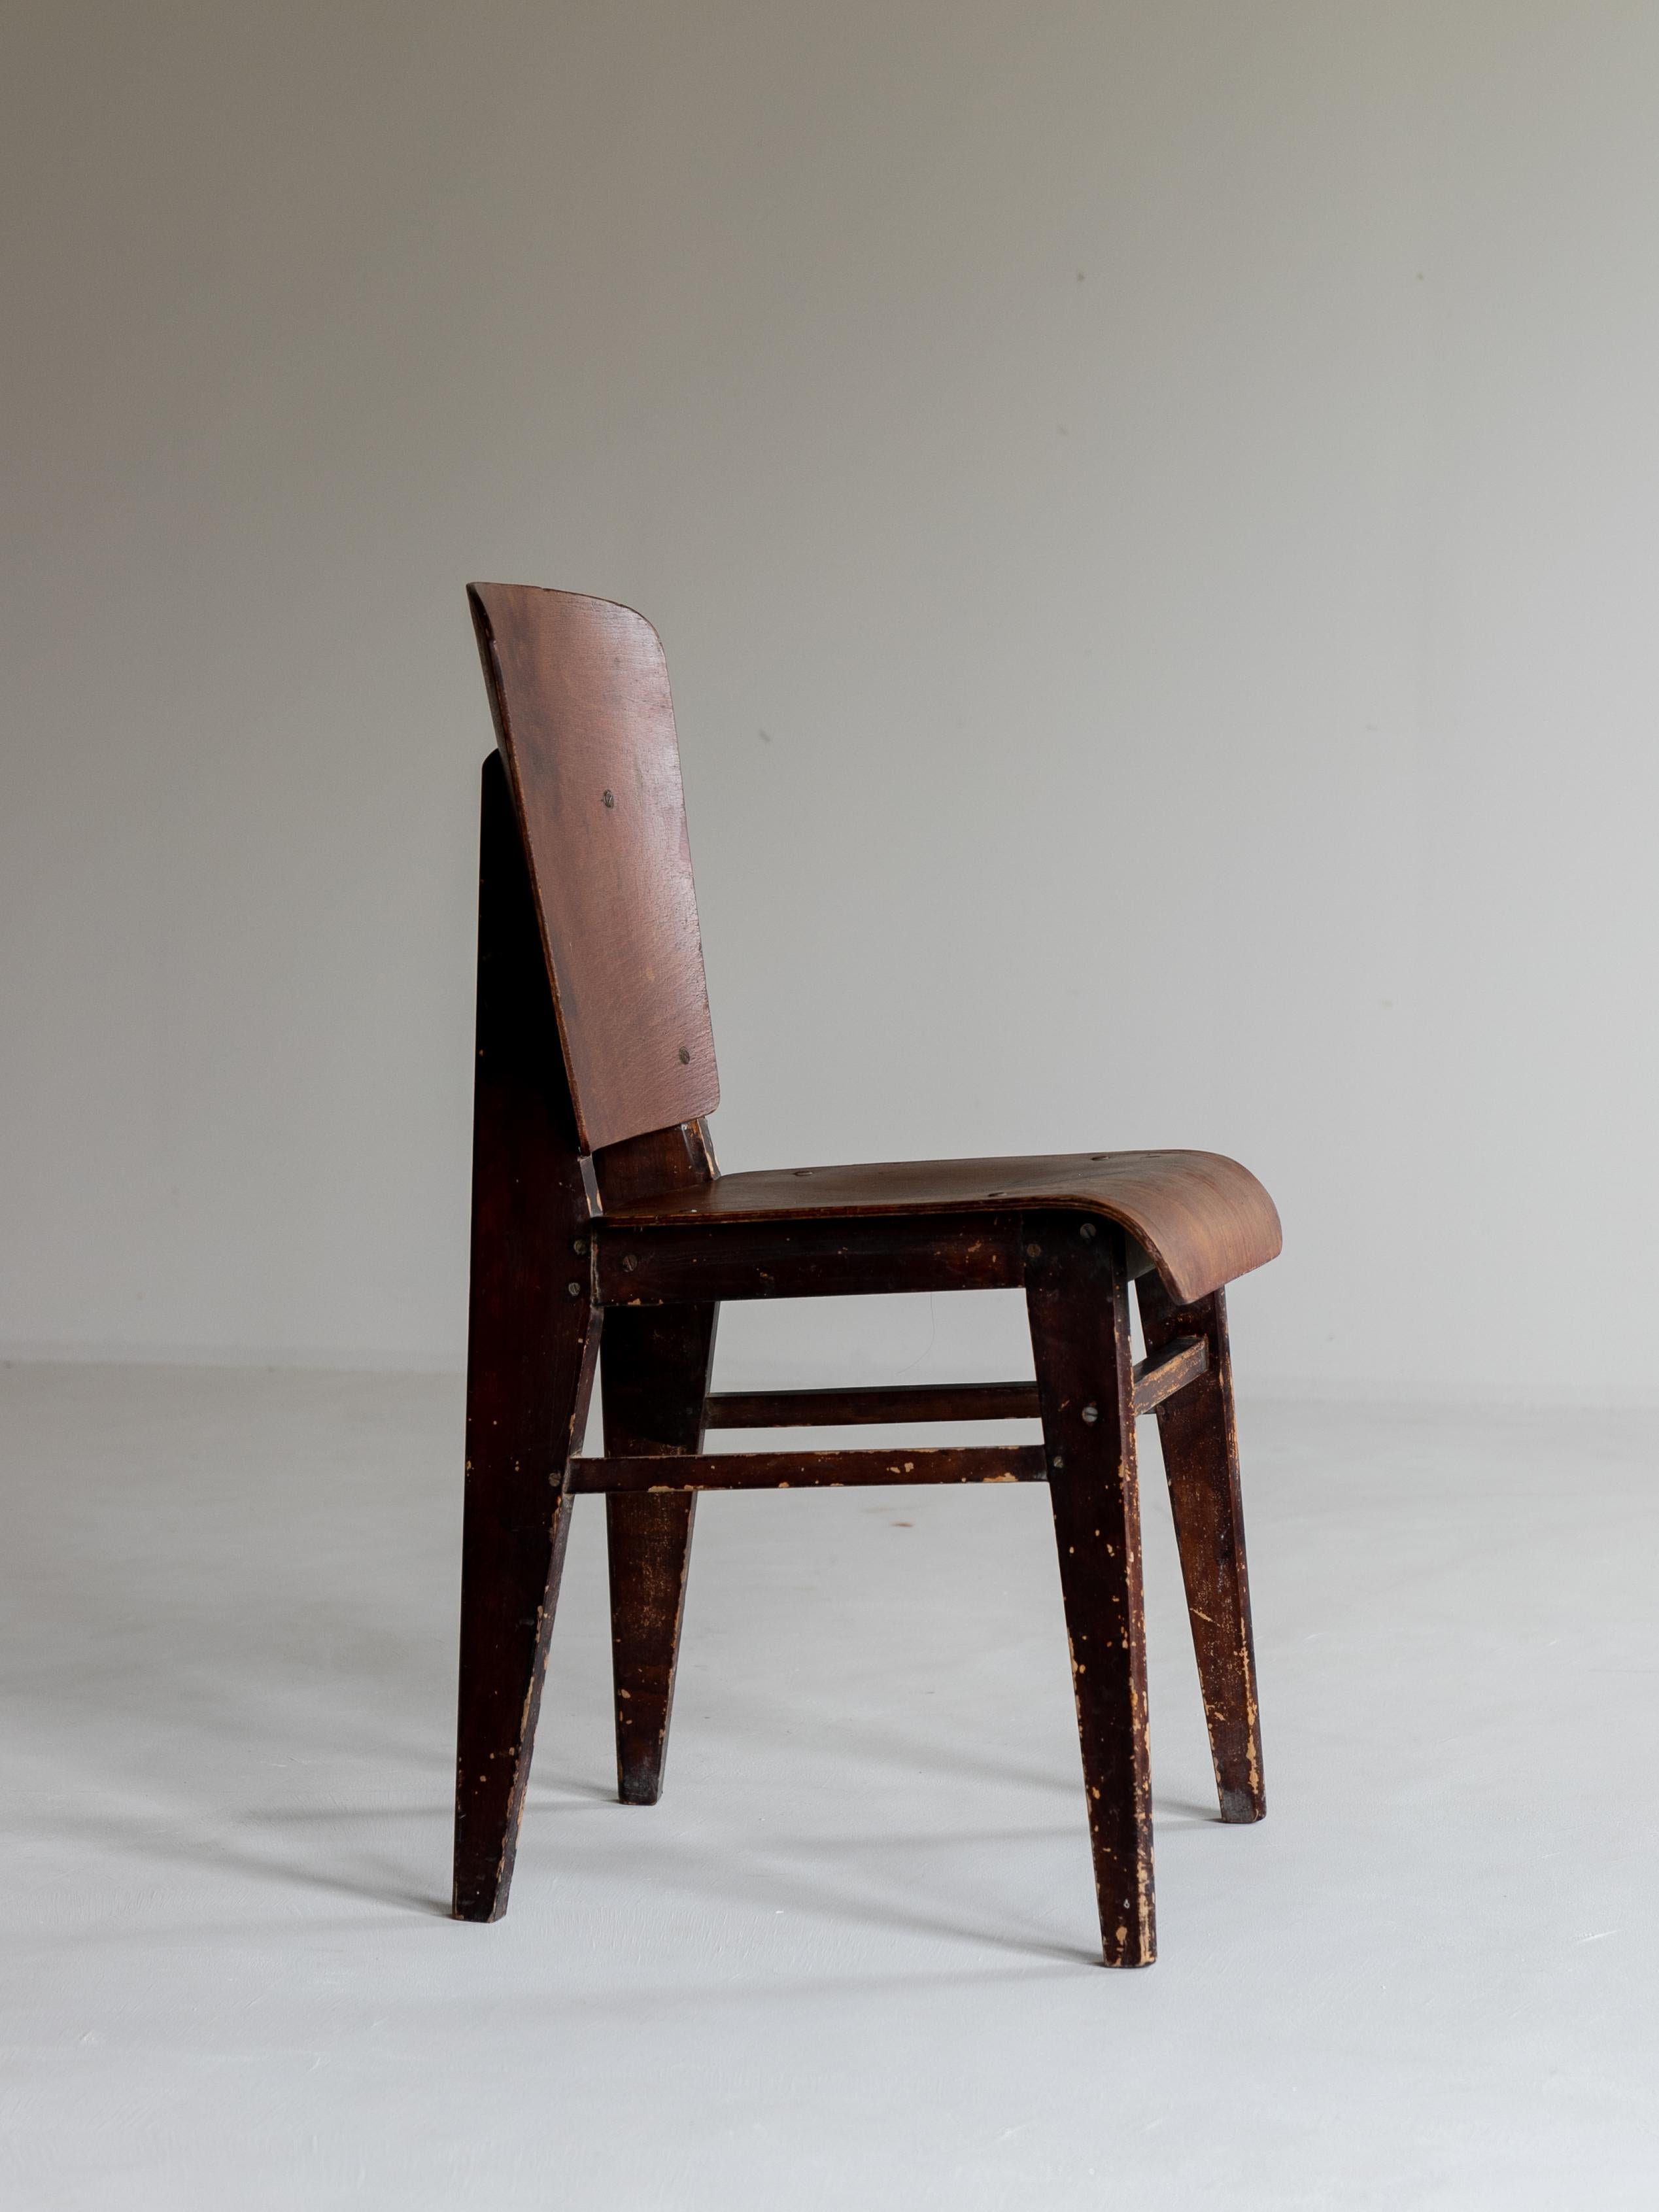 Jean Prouve Chair from Vauconsant In Good Condition For Sale In Sammu-shi, Chiba